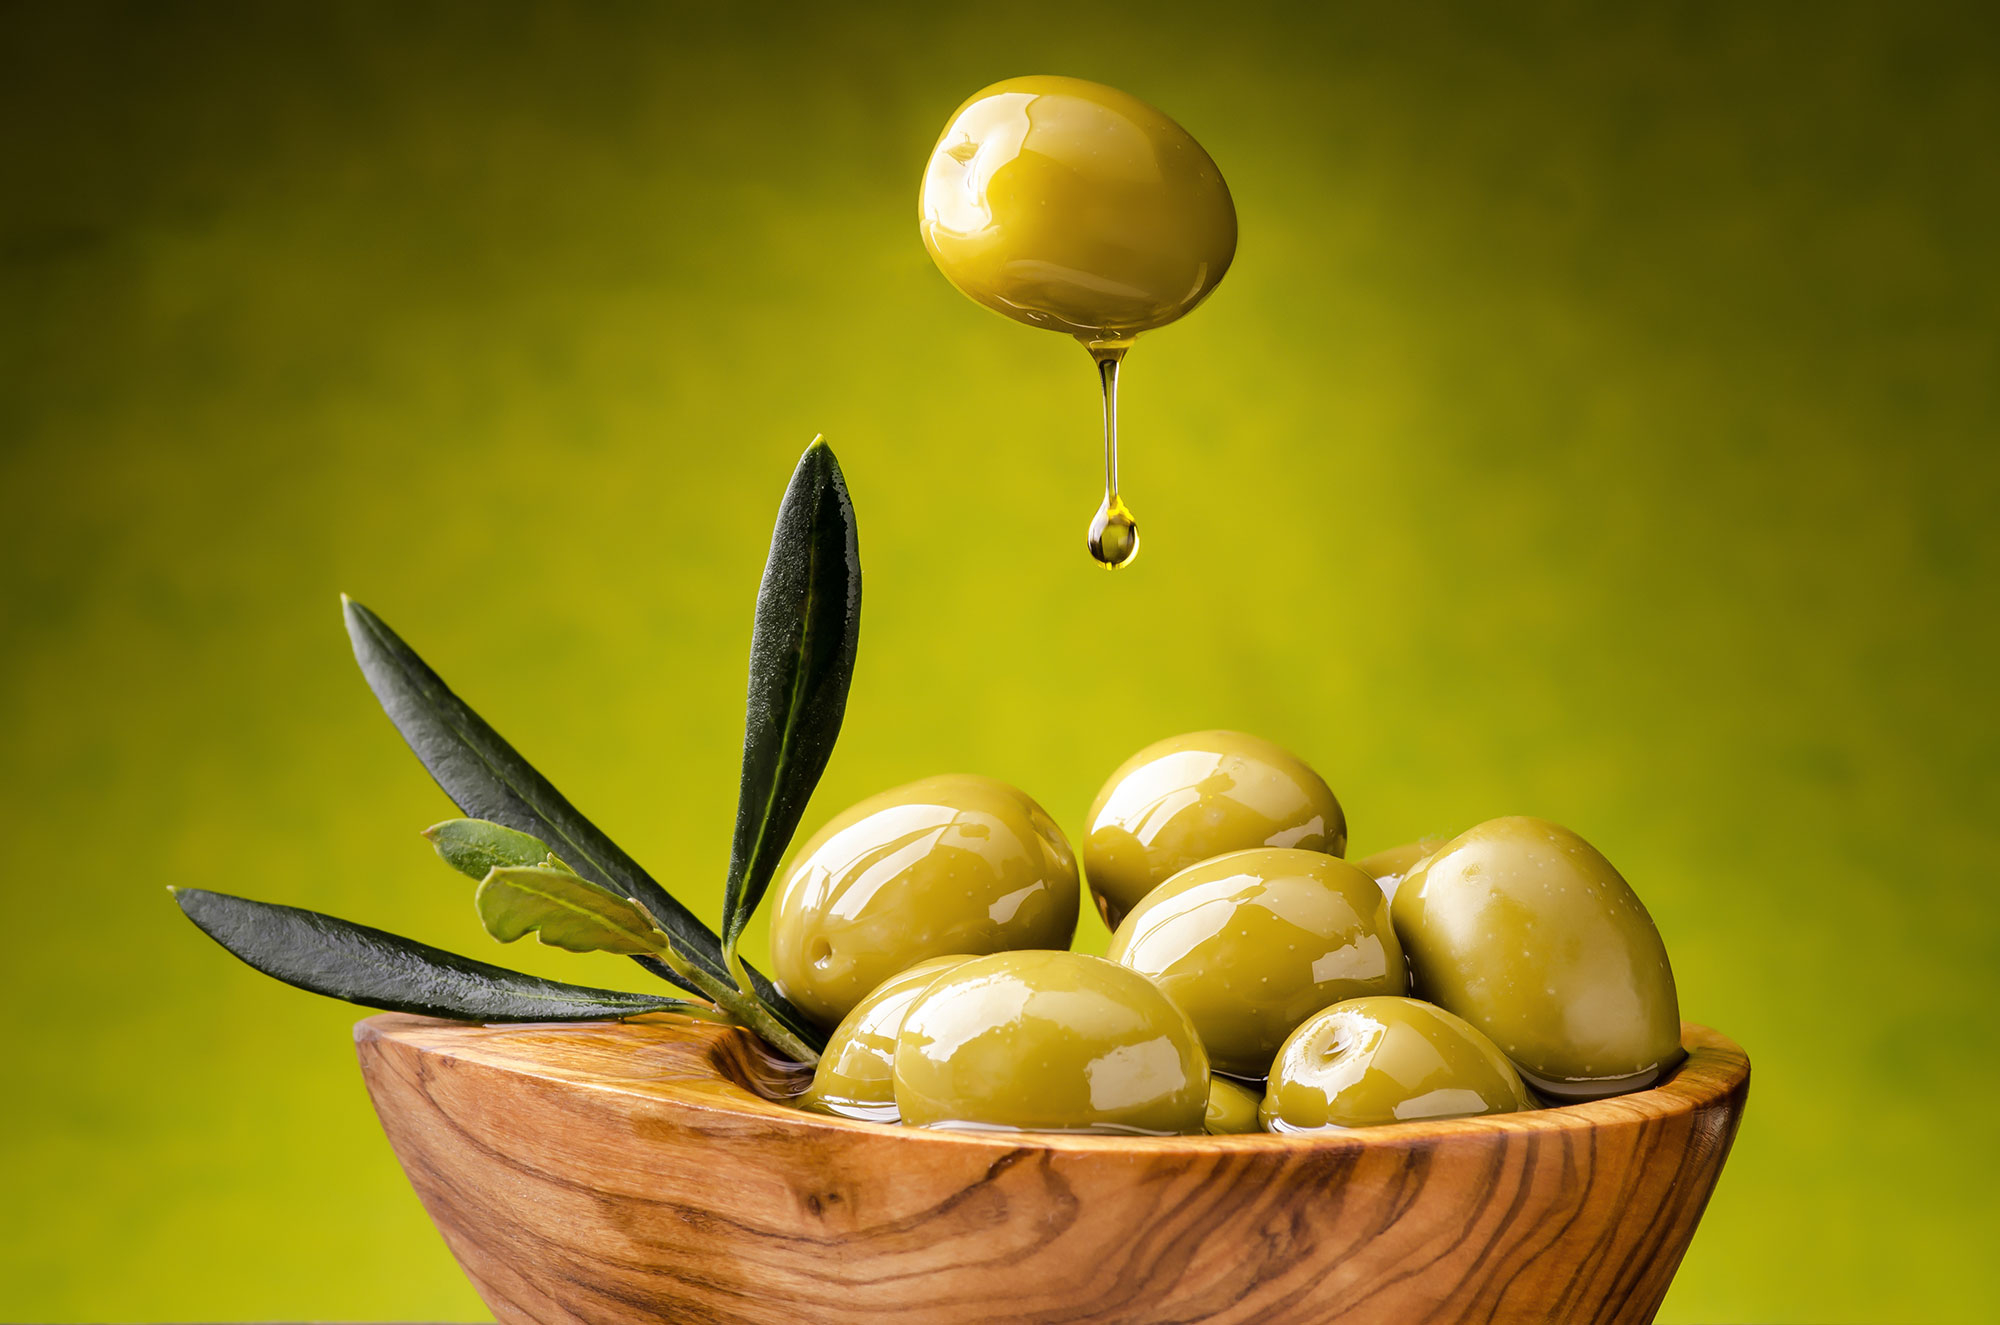 (Article 2 of 2). Olive polyphenols protect against aging (article 1 of 2)....